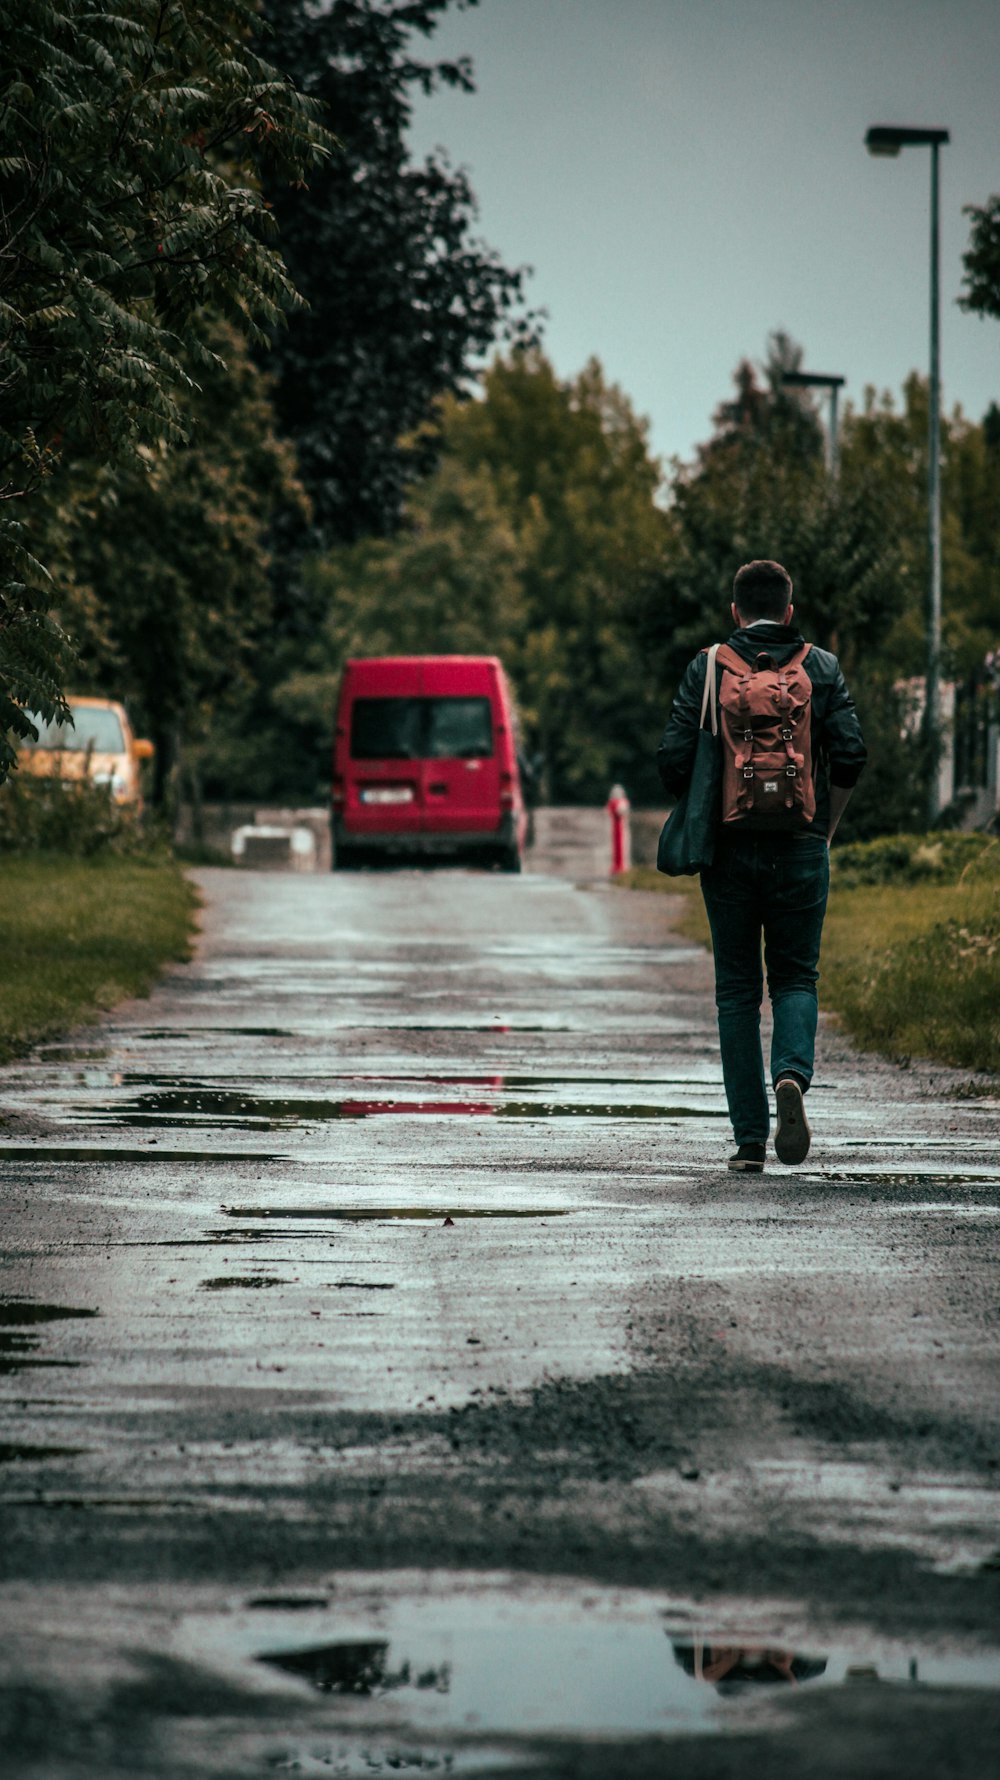 a person walking on a wet road